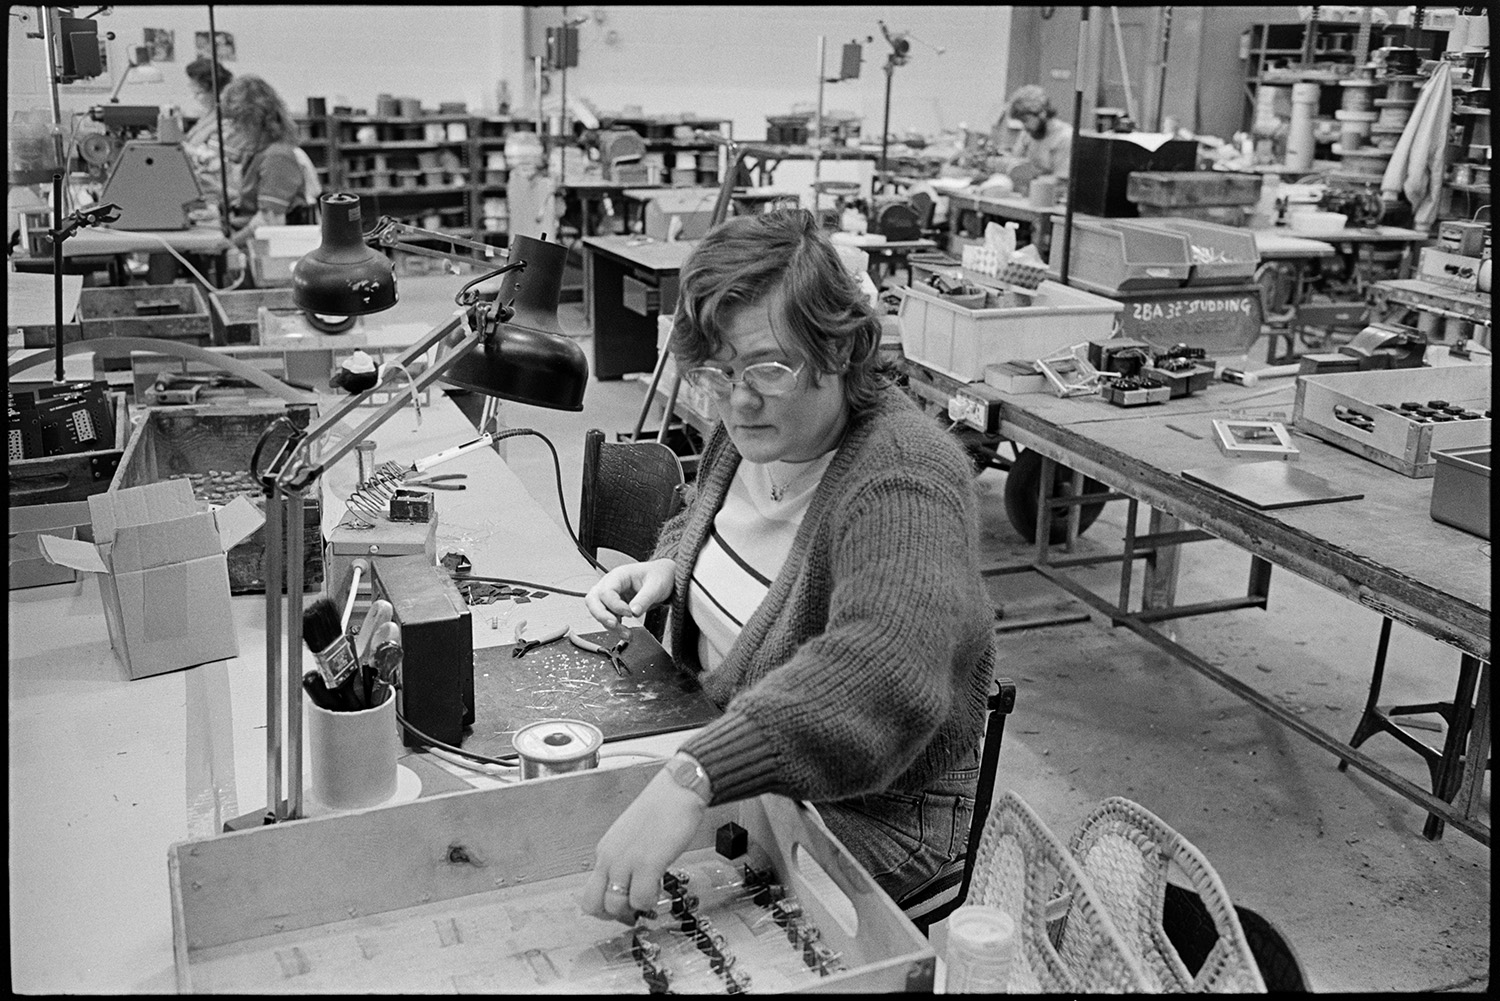 Inside transformer factory men and women making, designing transformers, computer. 
[A woman making transformers at Apex Transformers at Pathfields Business Park in South Molton. Other people can be seen working at desks in the factory in the background.